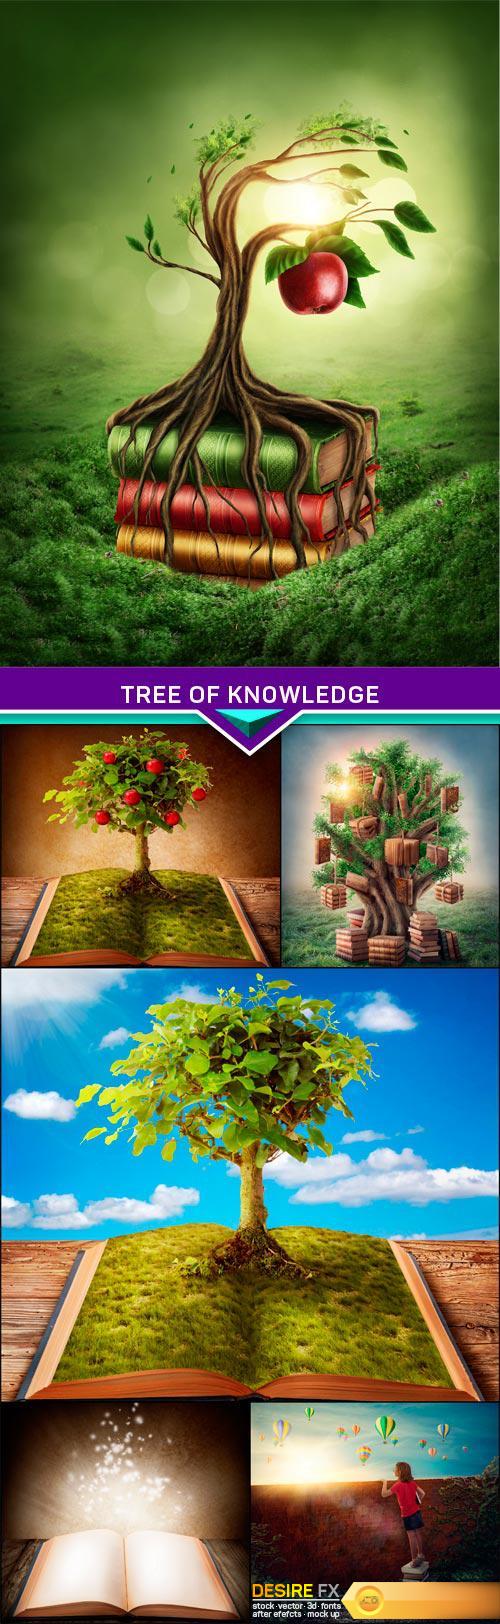 Tree of knowledge and forbidden fruit 6x JPEG